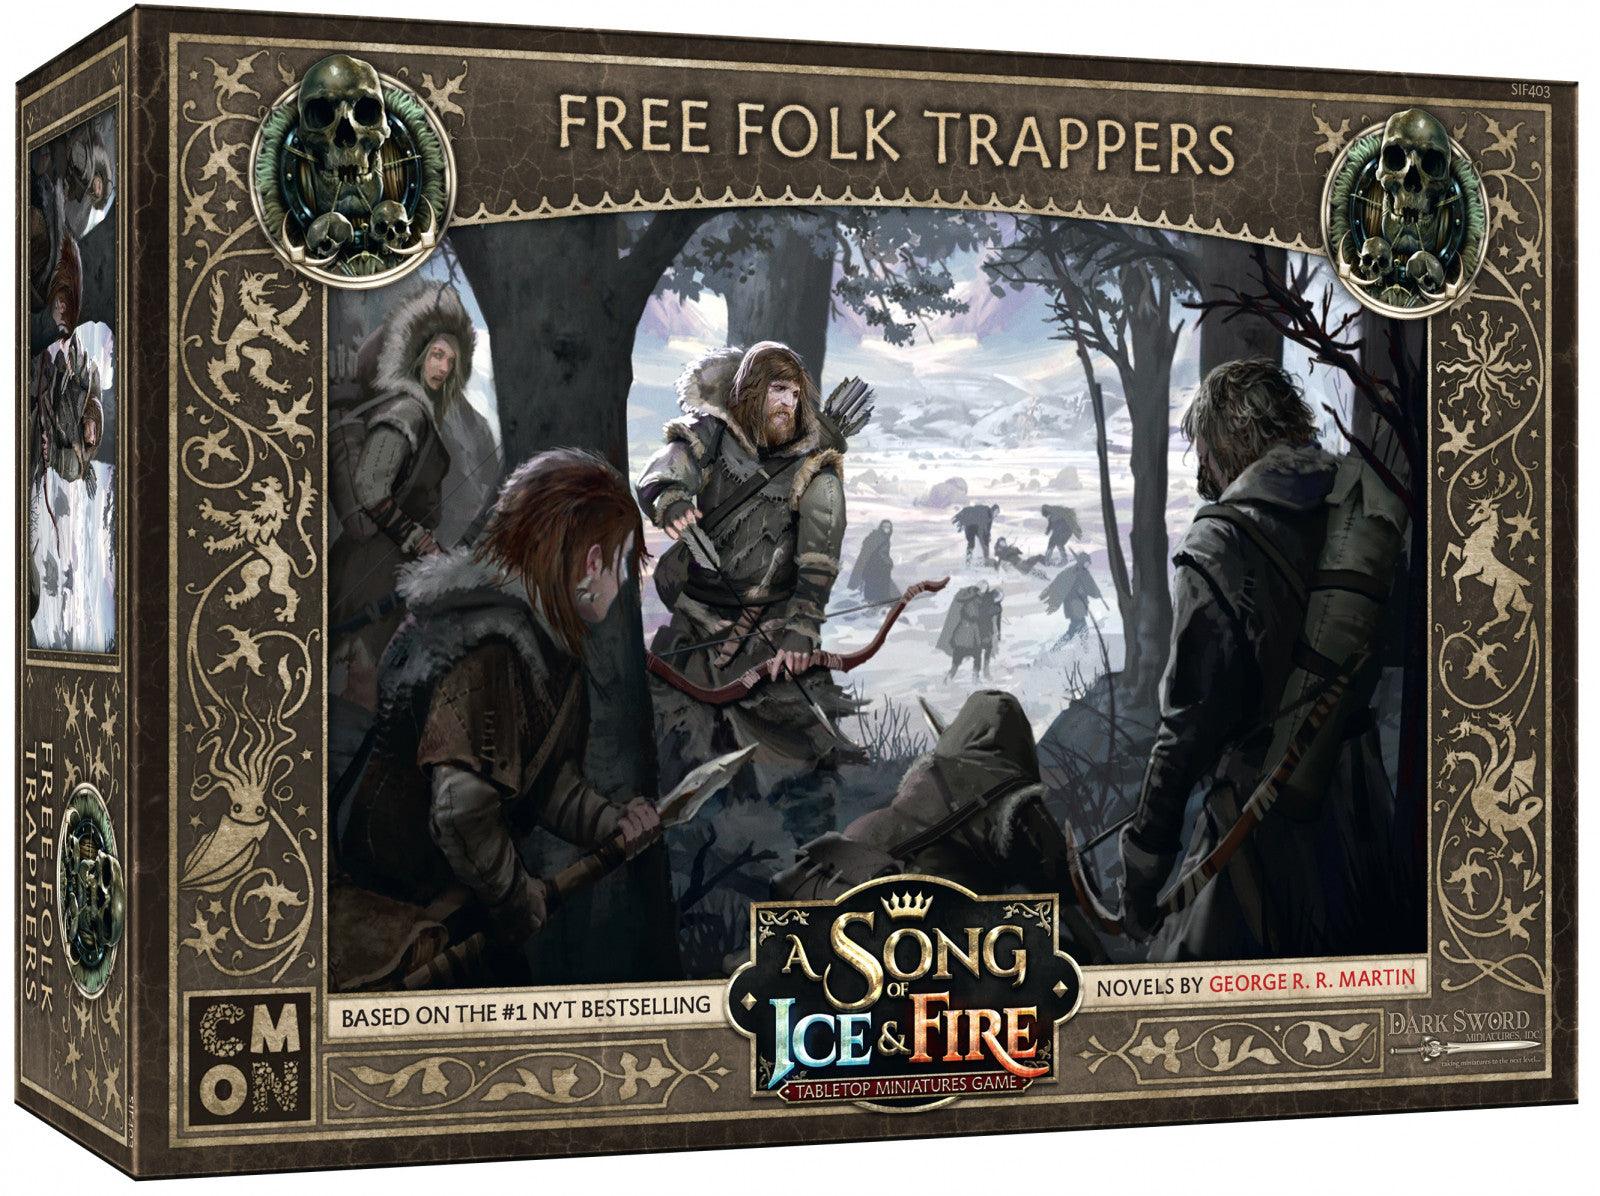 VR-64810 A Song of Ice and Fire TMG - Free Folk Trappers - CMON - Titan Pop Culture